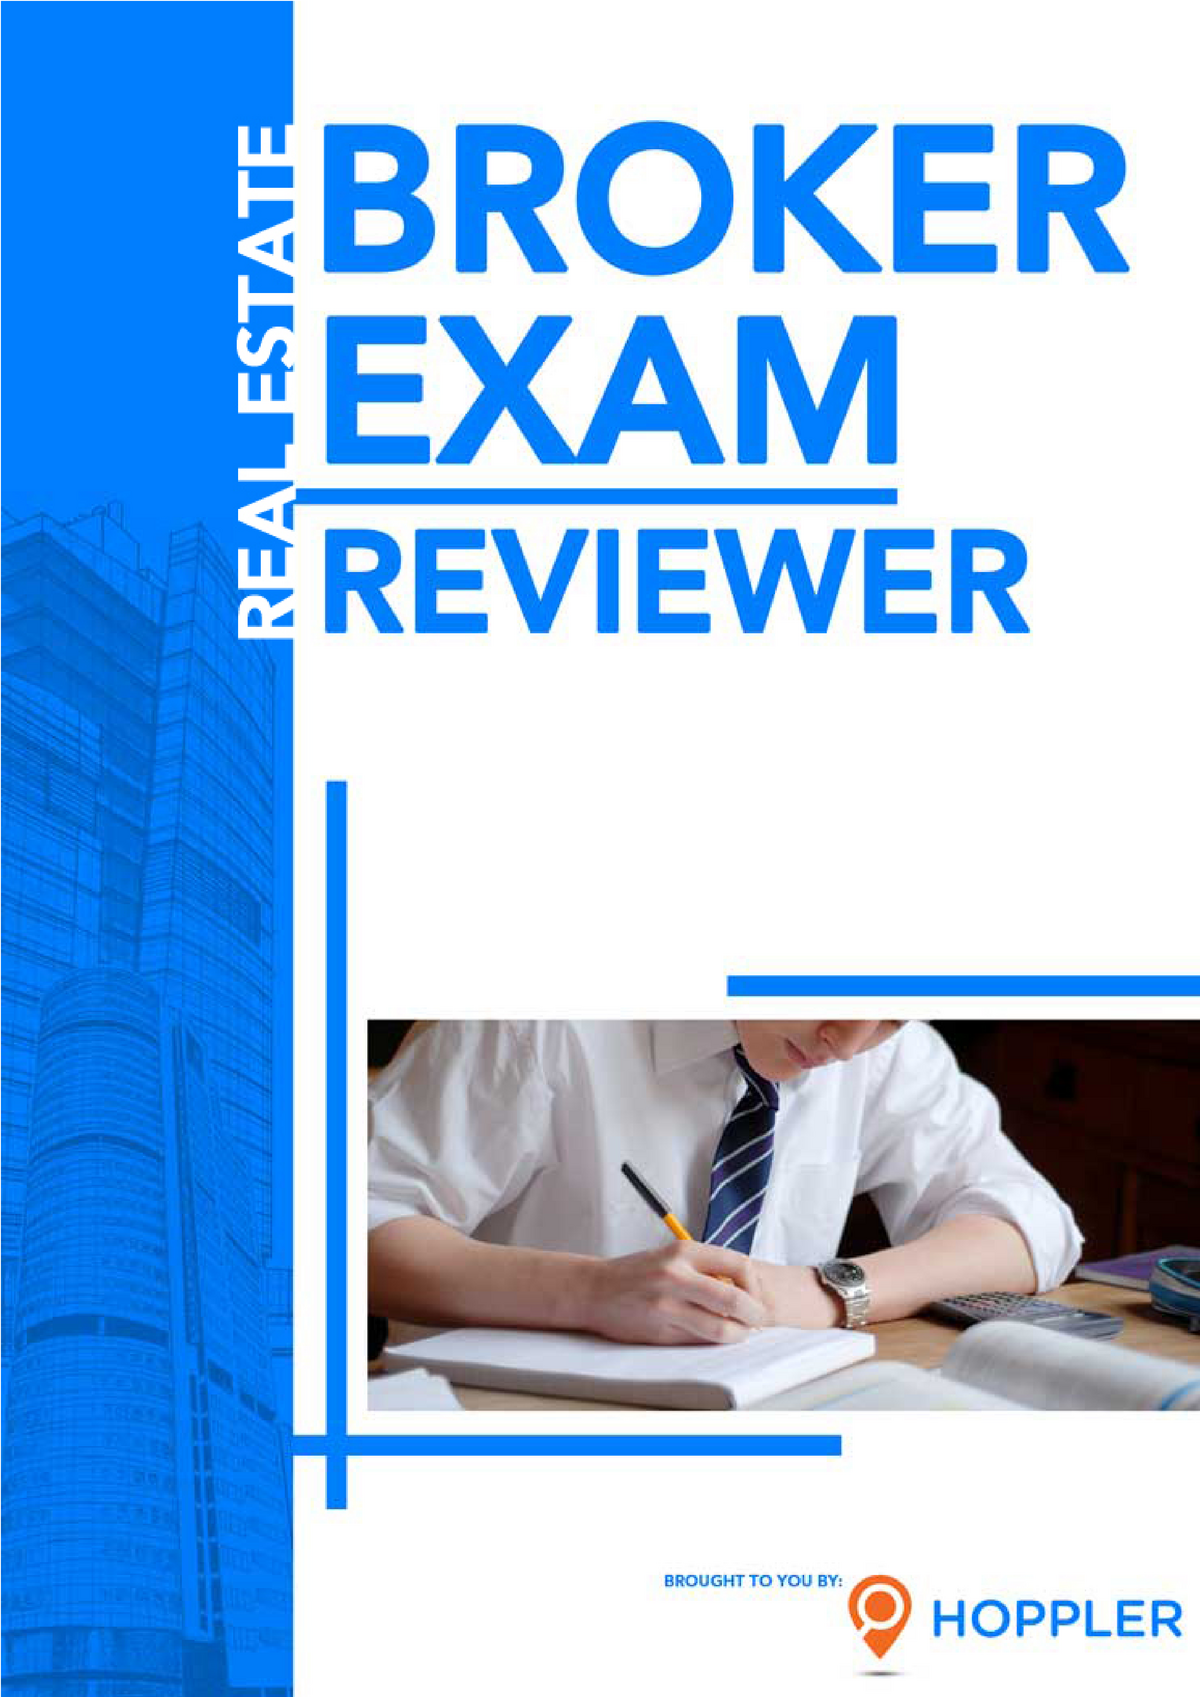 Real Estate Broker Exam Reviewer ebook ` To pass any kind of